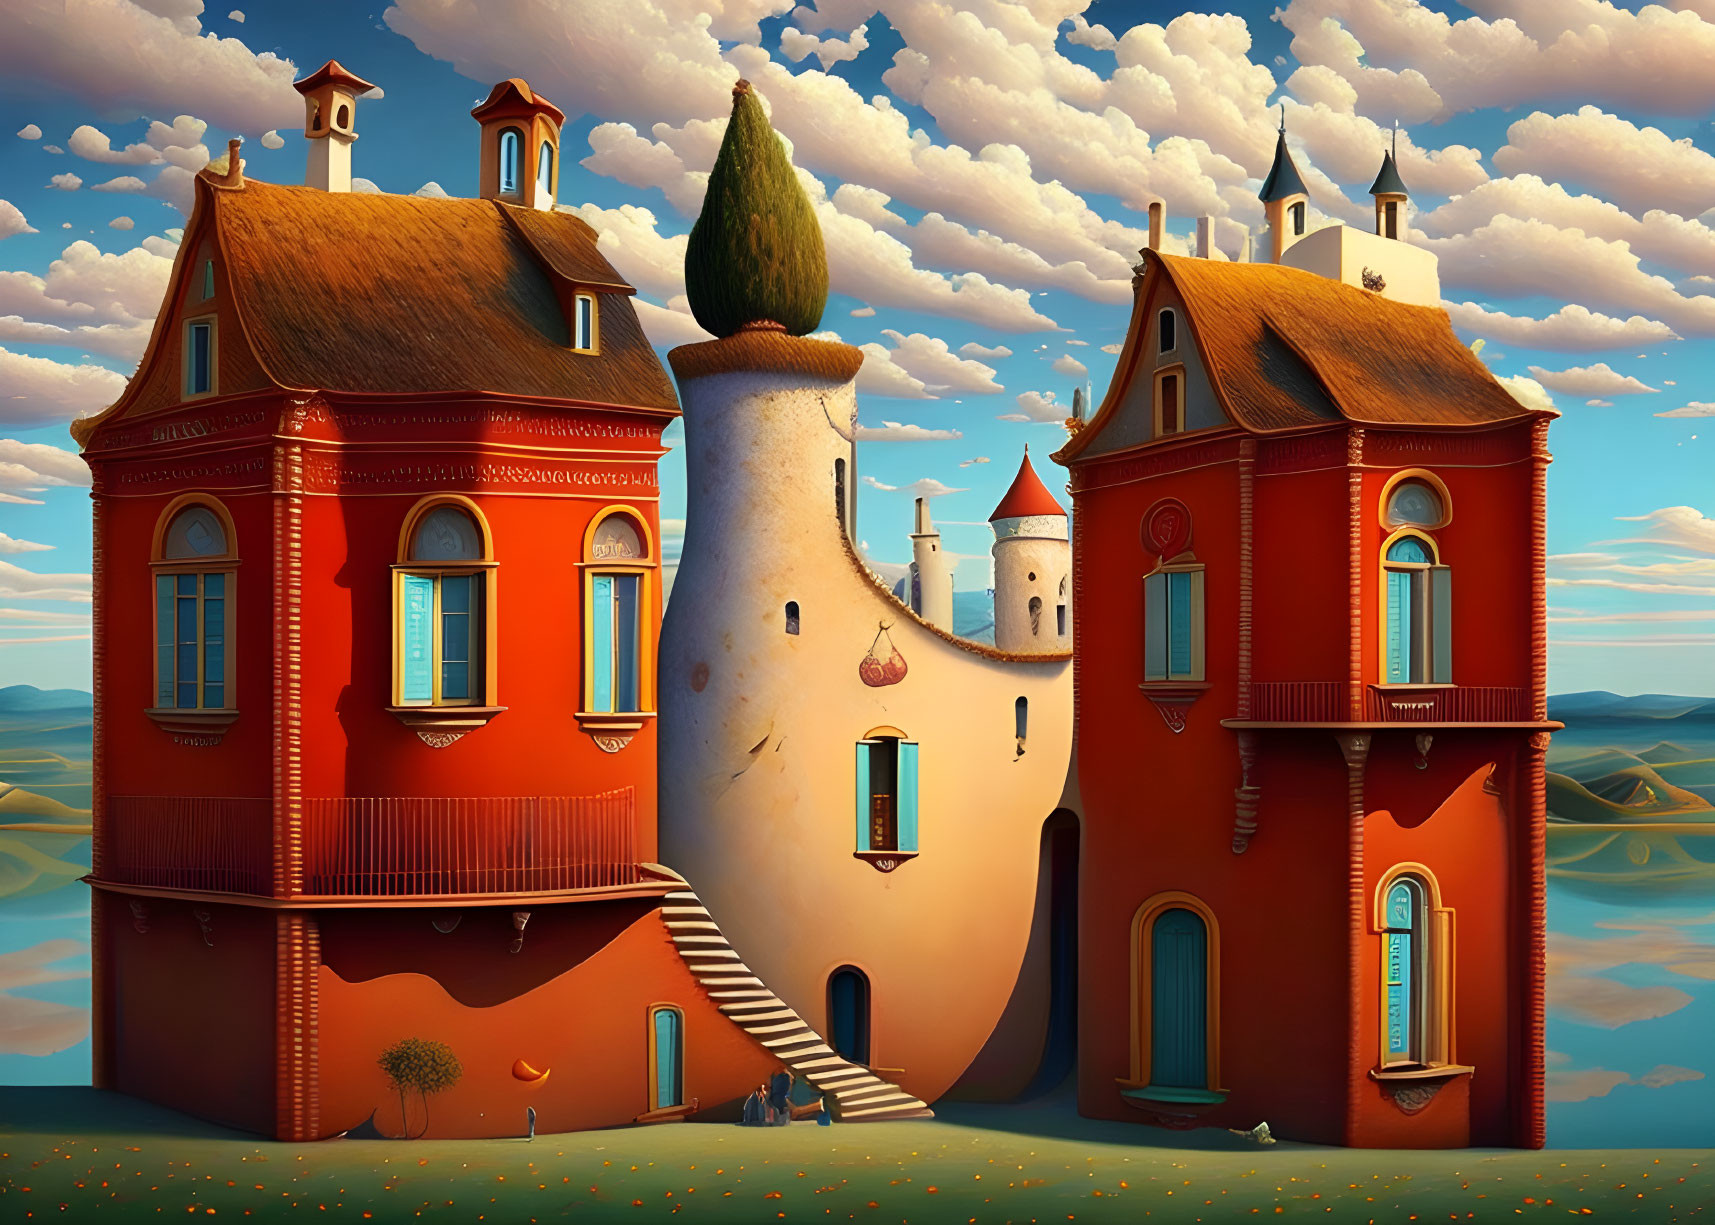 Whimsical surreal artwork: Red buildings with eyes and lips, rolling hills, blue sky